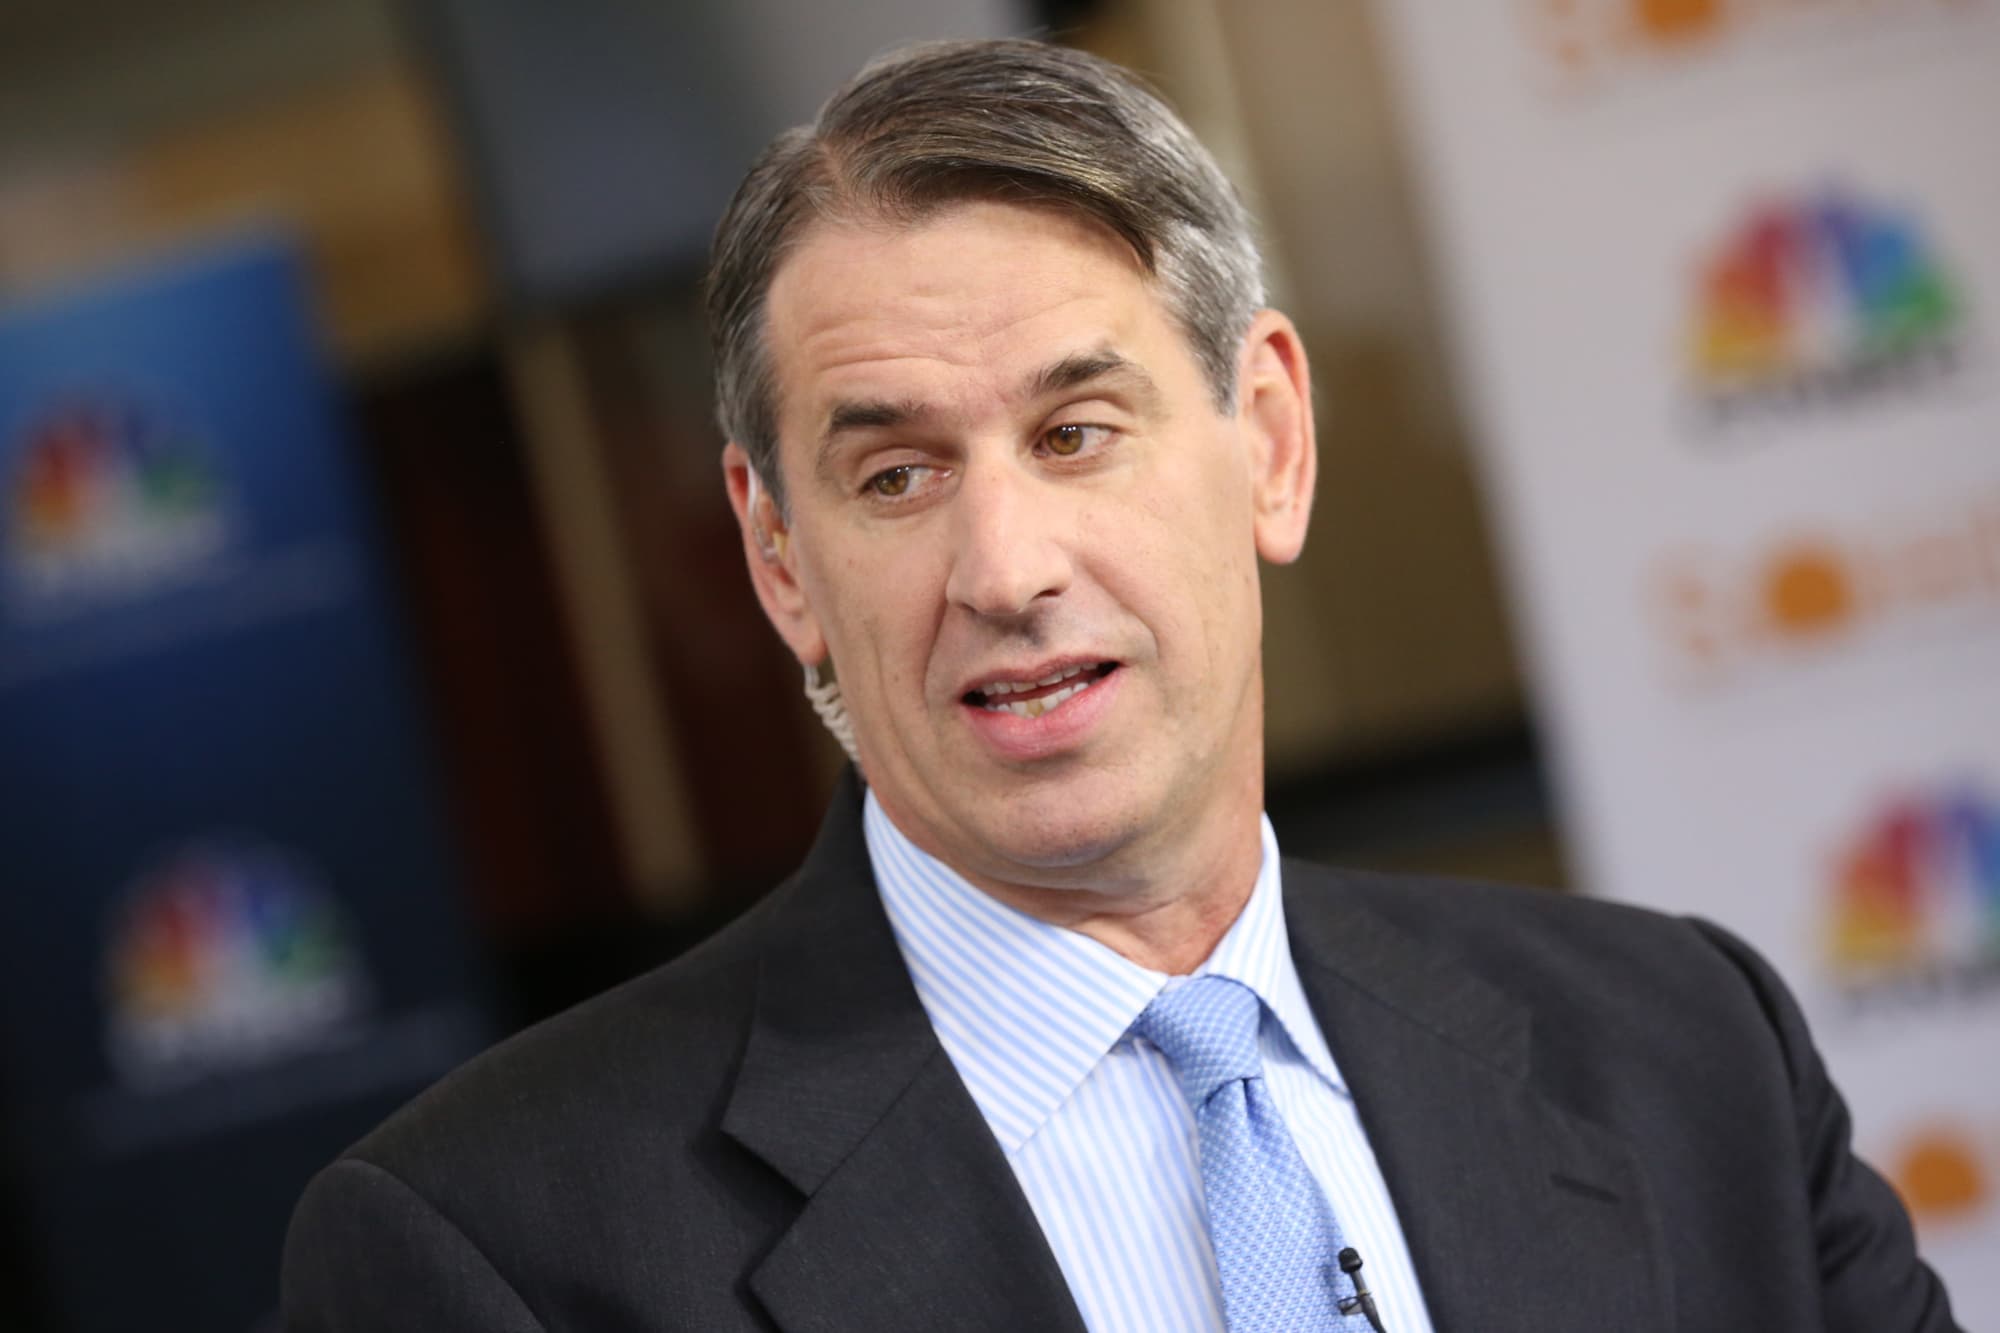 The IPO process has worsened over the past five years, says Bill Gurley